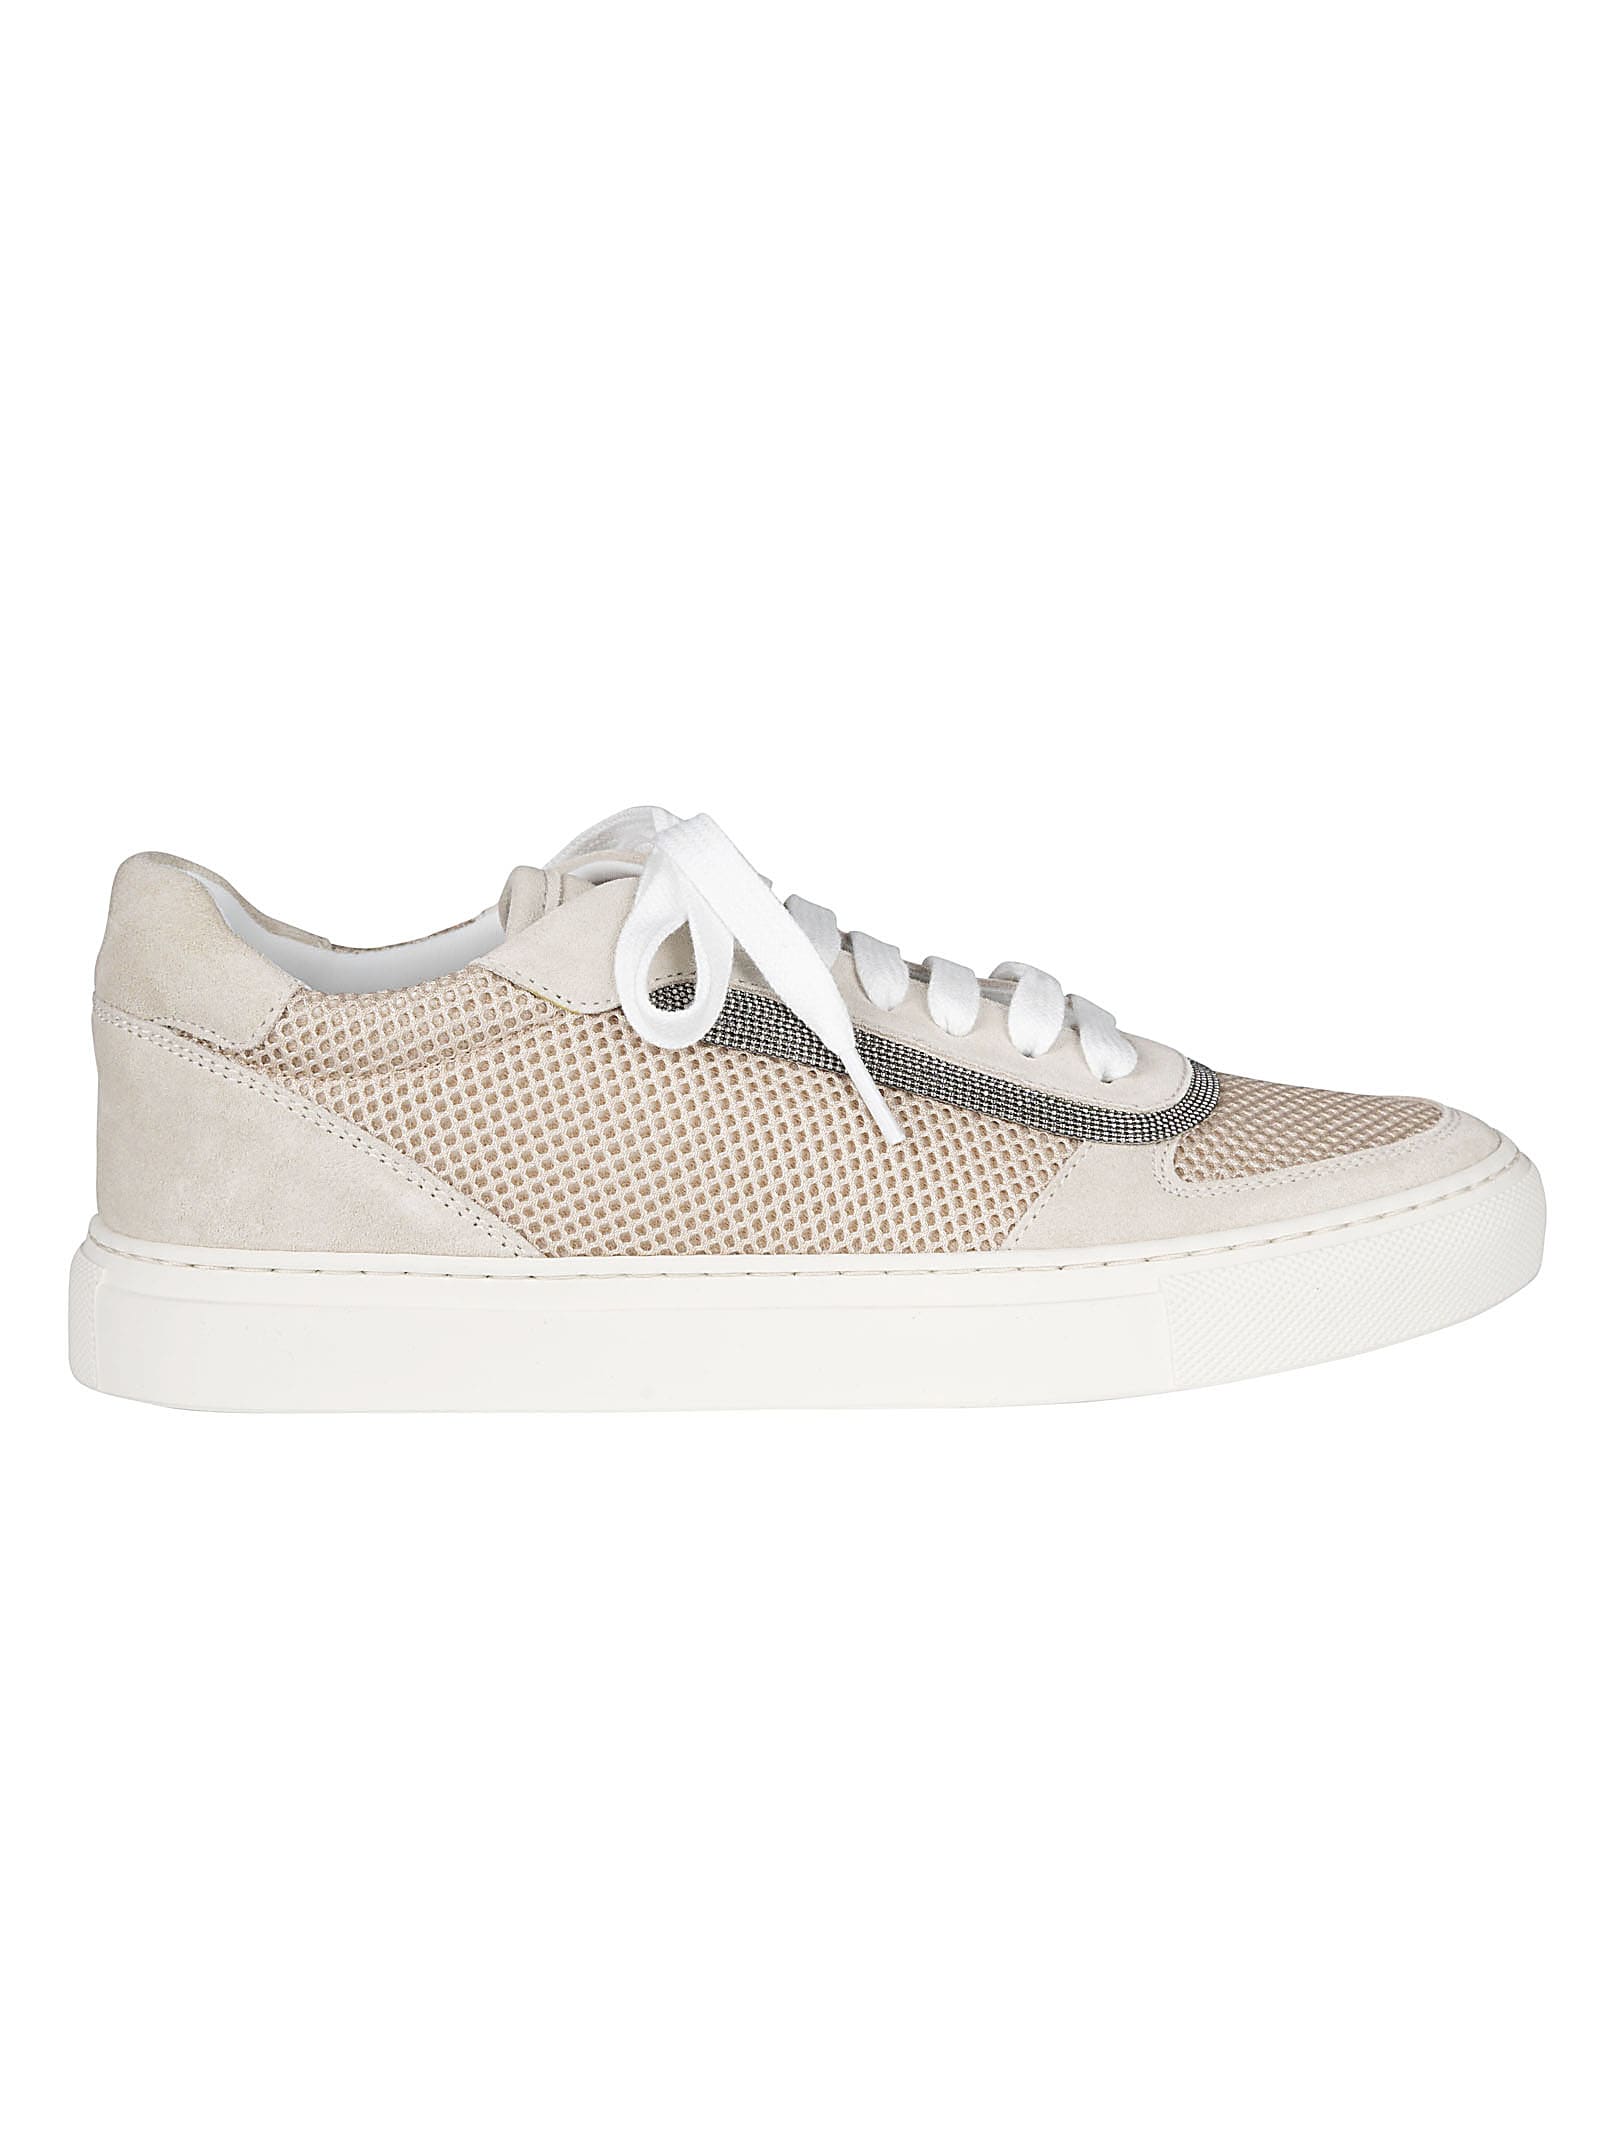 Brunello Cucinelli Mesh Lace-up Sneakers